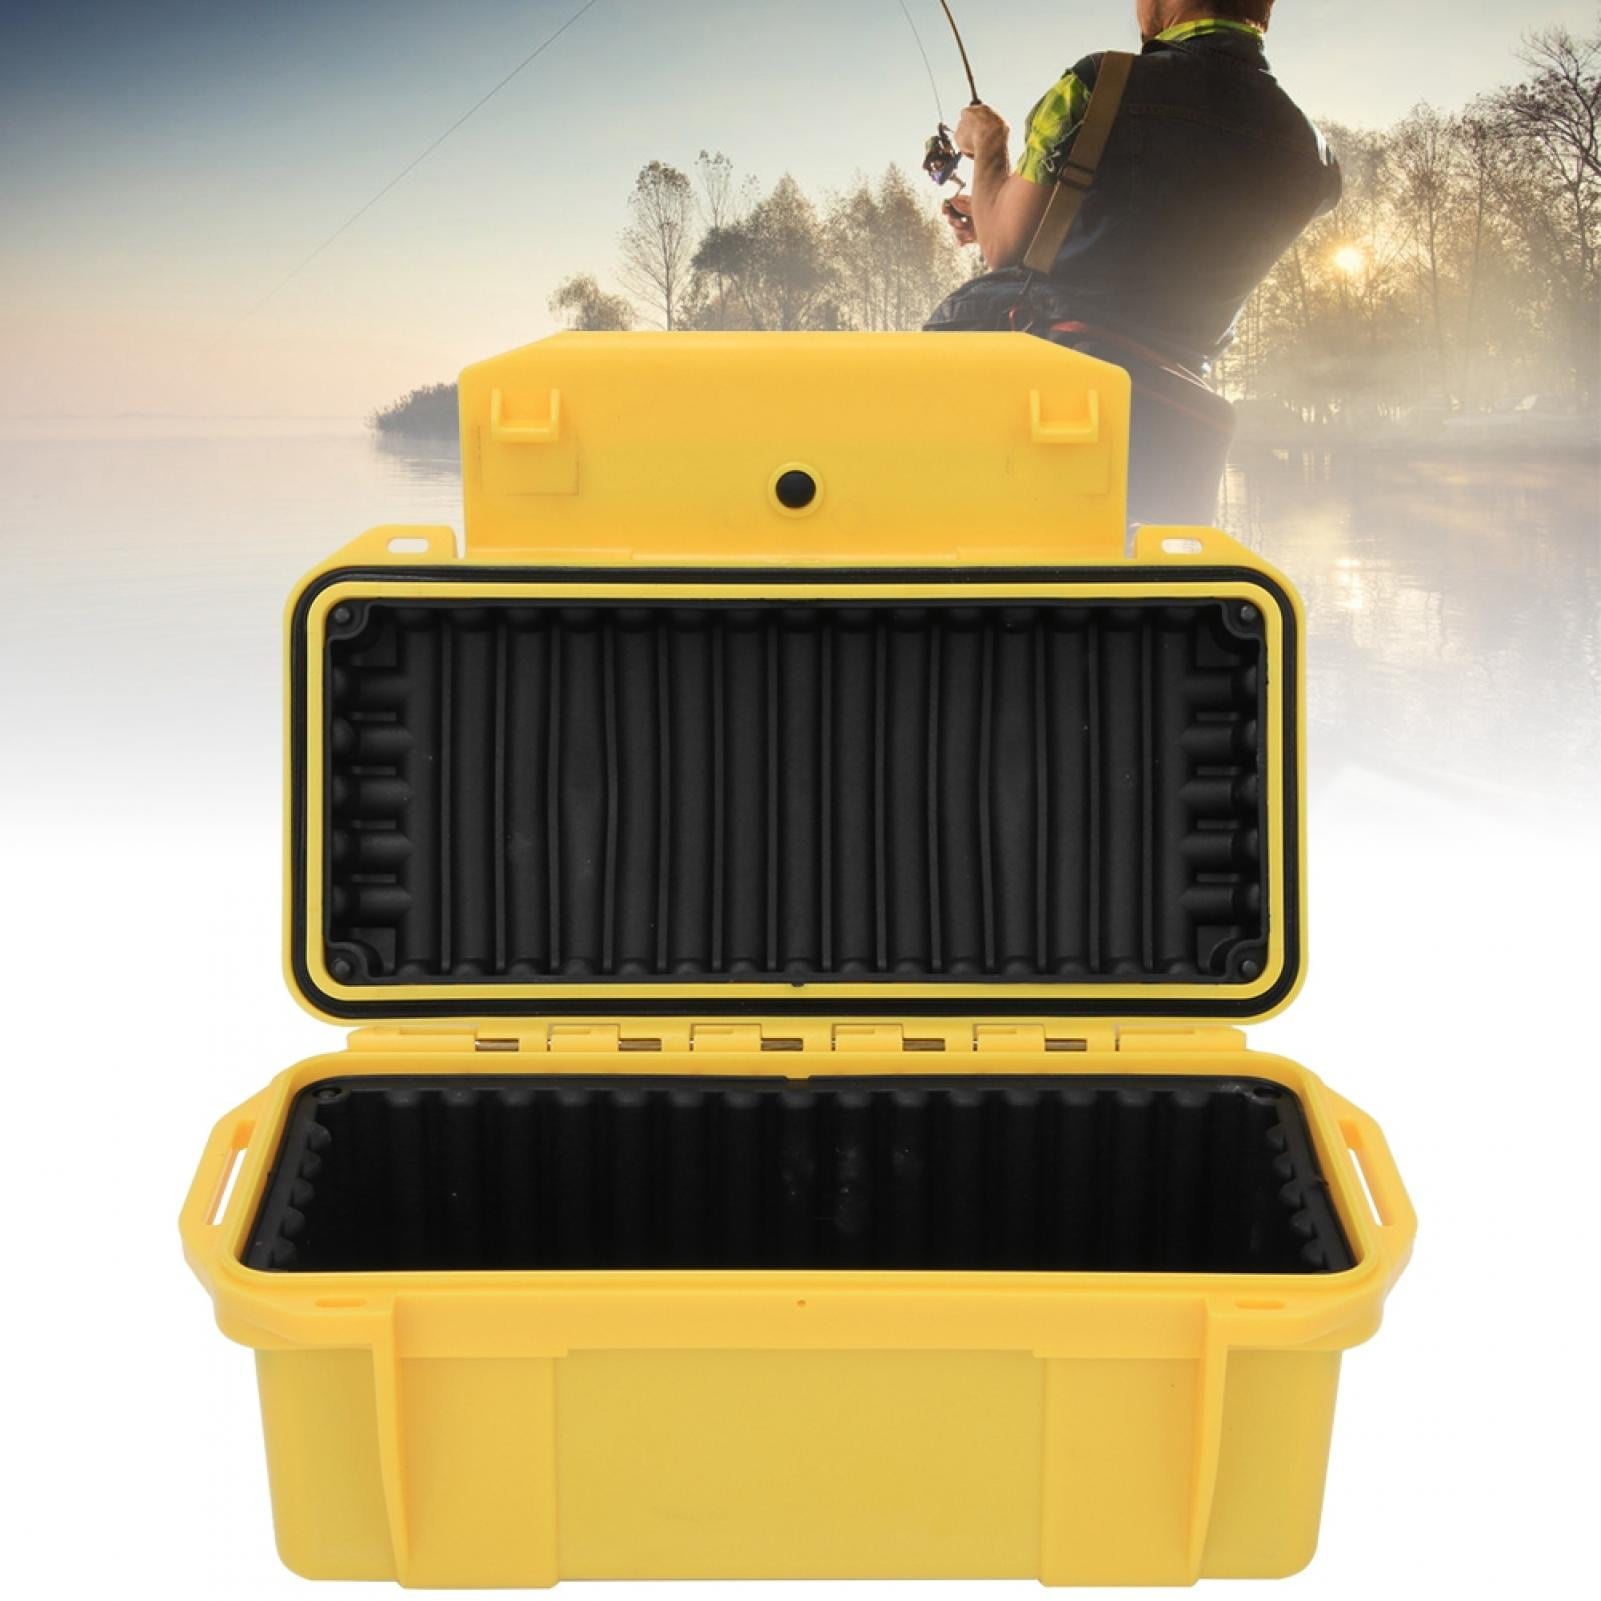 Plastic Small Tool Box Waterproof Hard Case Bag Storage Box Safety Toolbox  for Mechanics Outdoor Portable Suitcase Tool Case